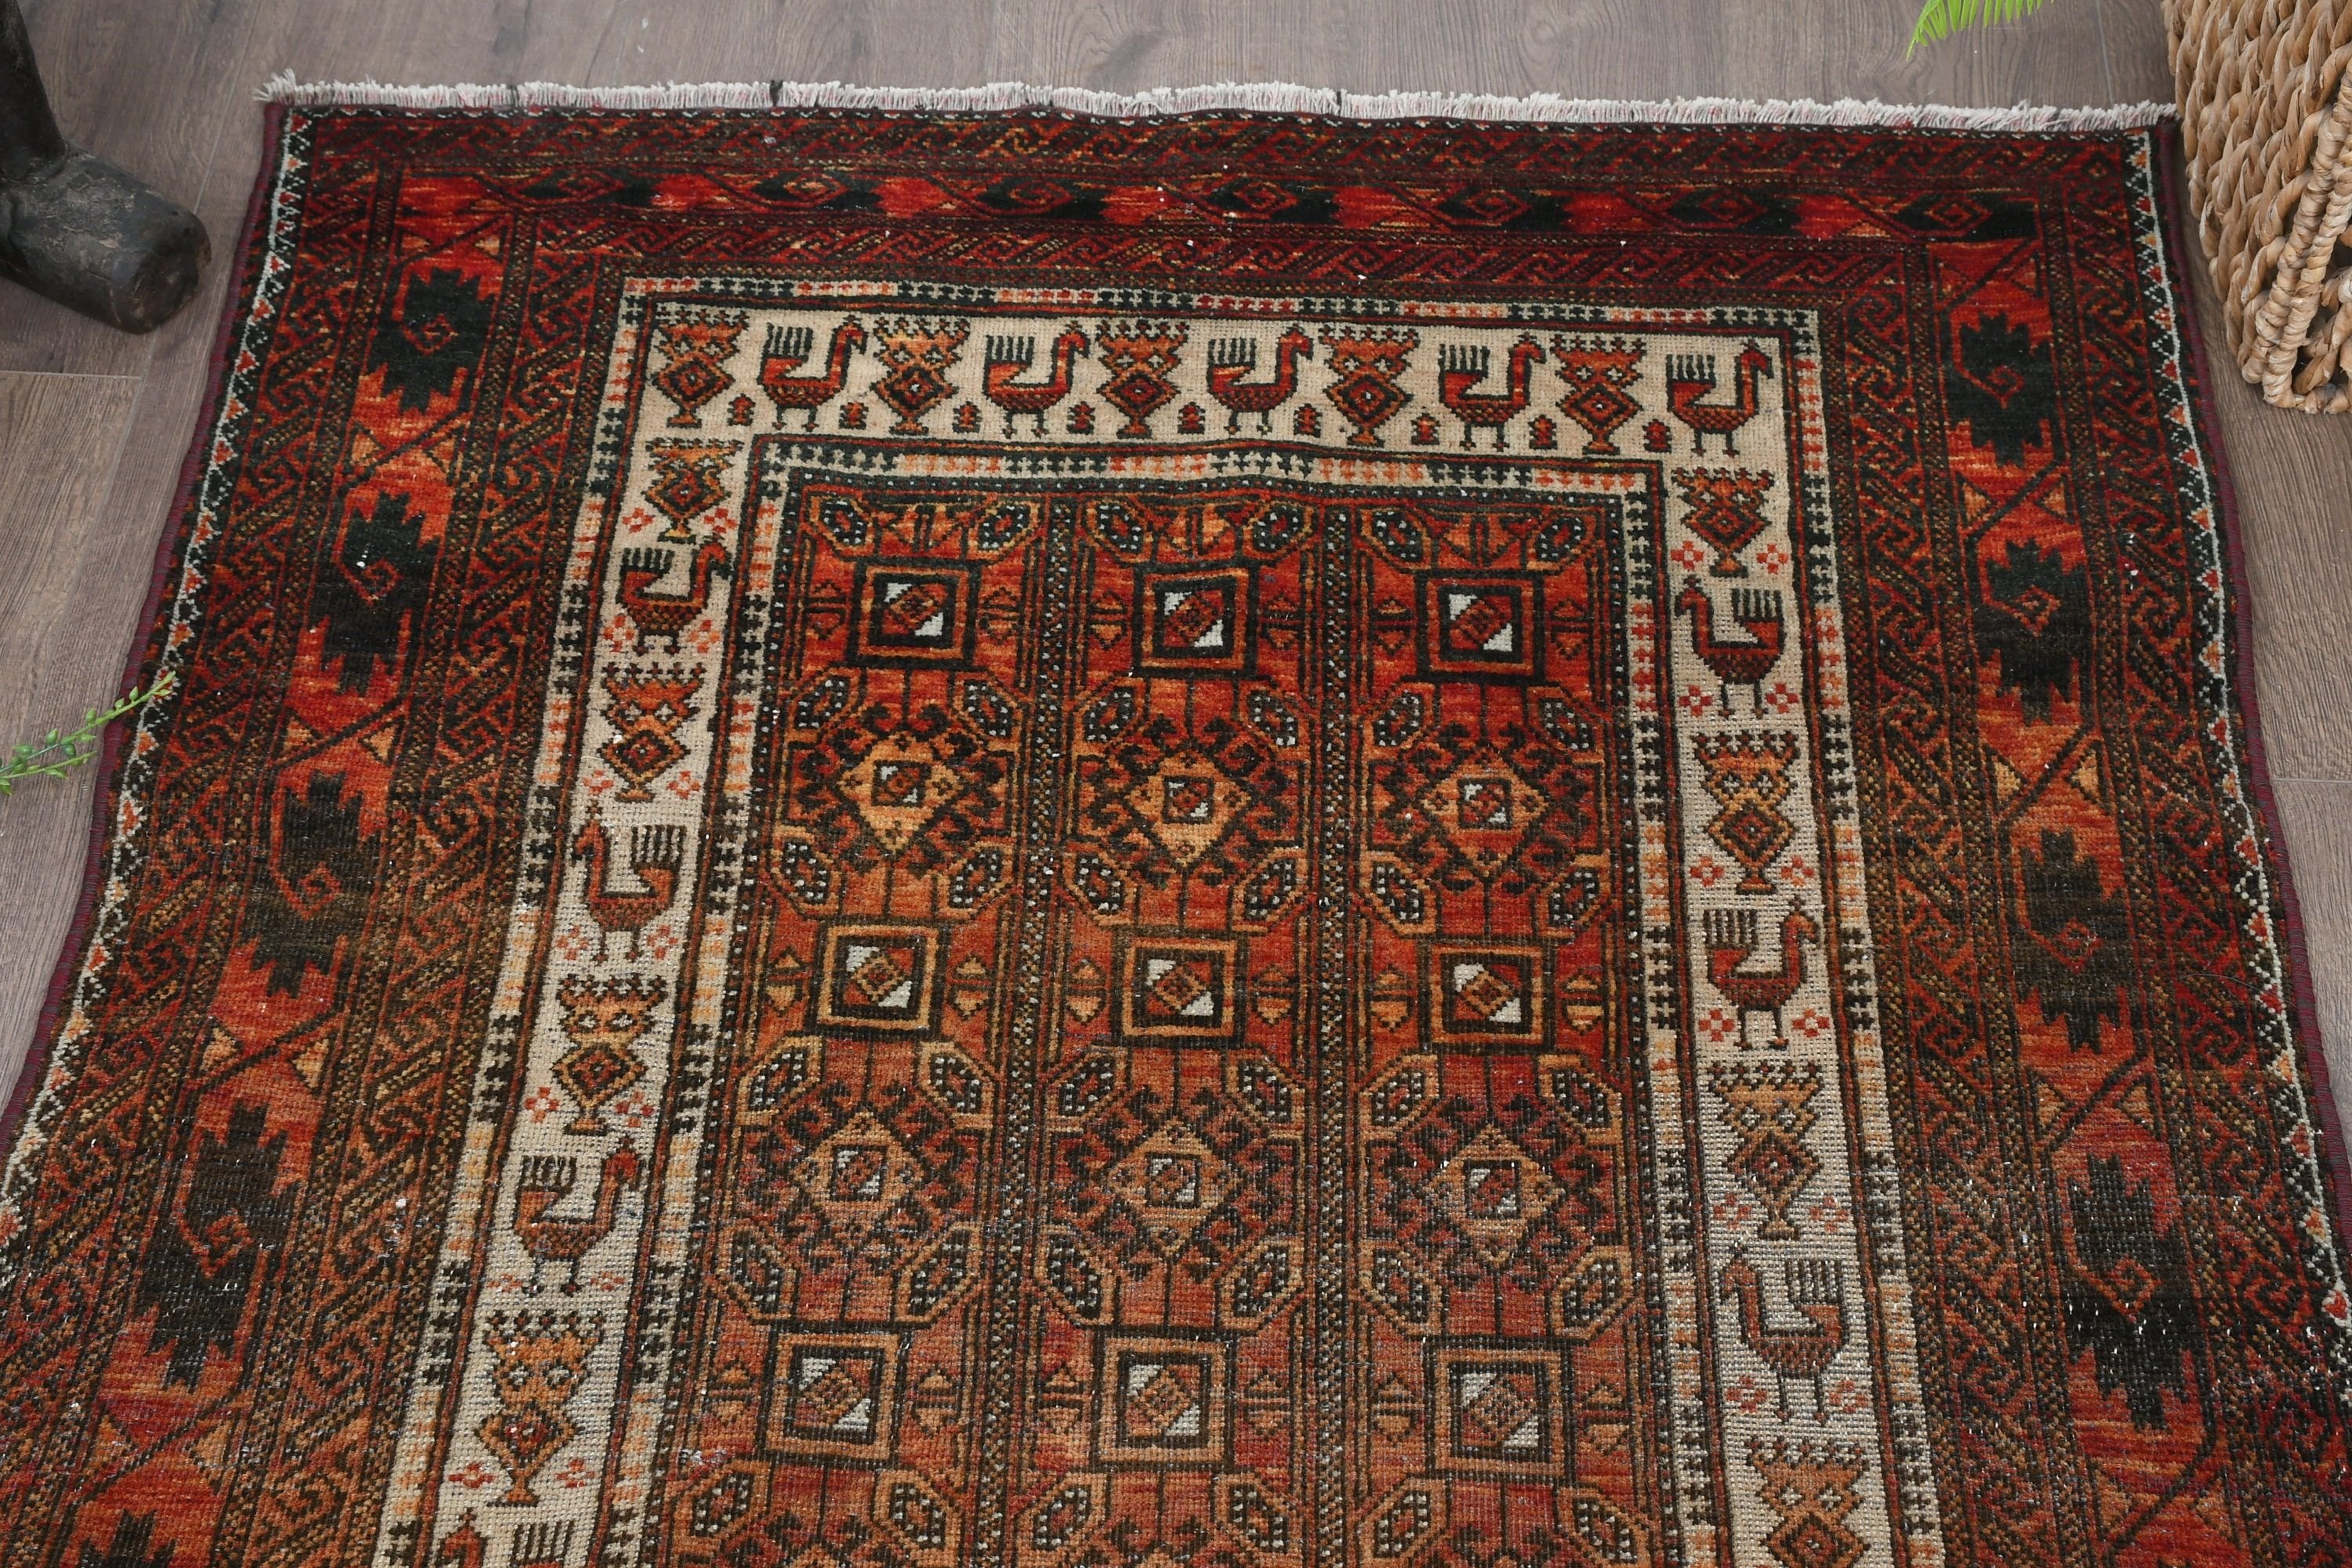 Entry Rug, Brown Cool Rugs, Vintage Rug, Bedroom Rug, Floor Rugs, 3.1x6.4 ft Accent Rugs, Turkish Rugs, Rugs for Kitchen, Anatolian Rugs